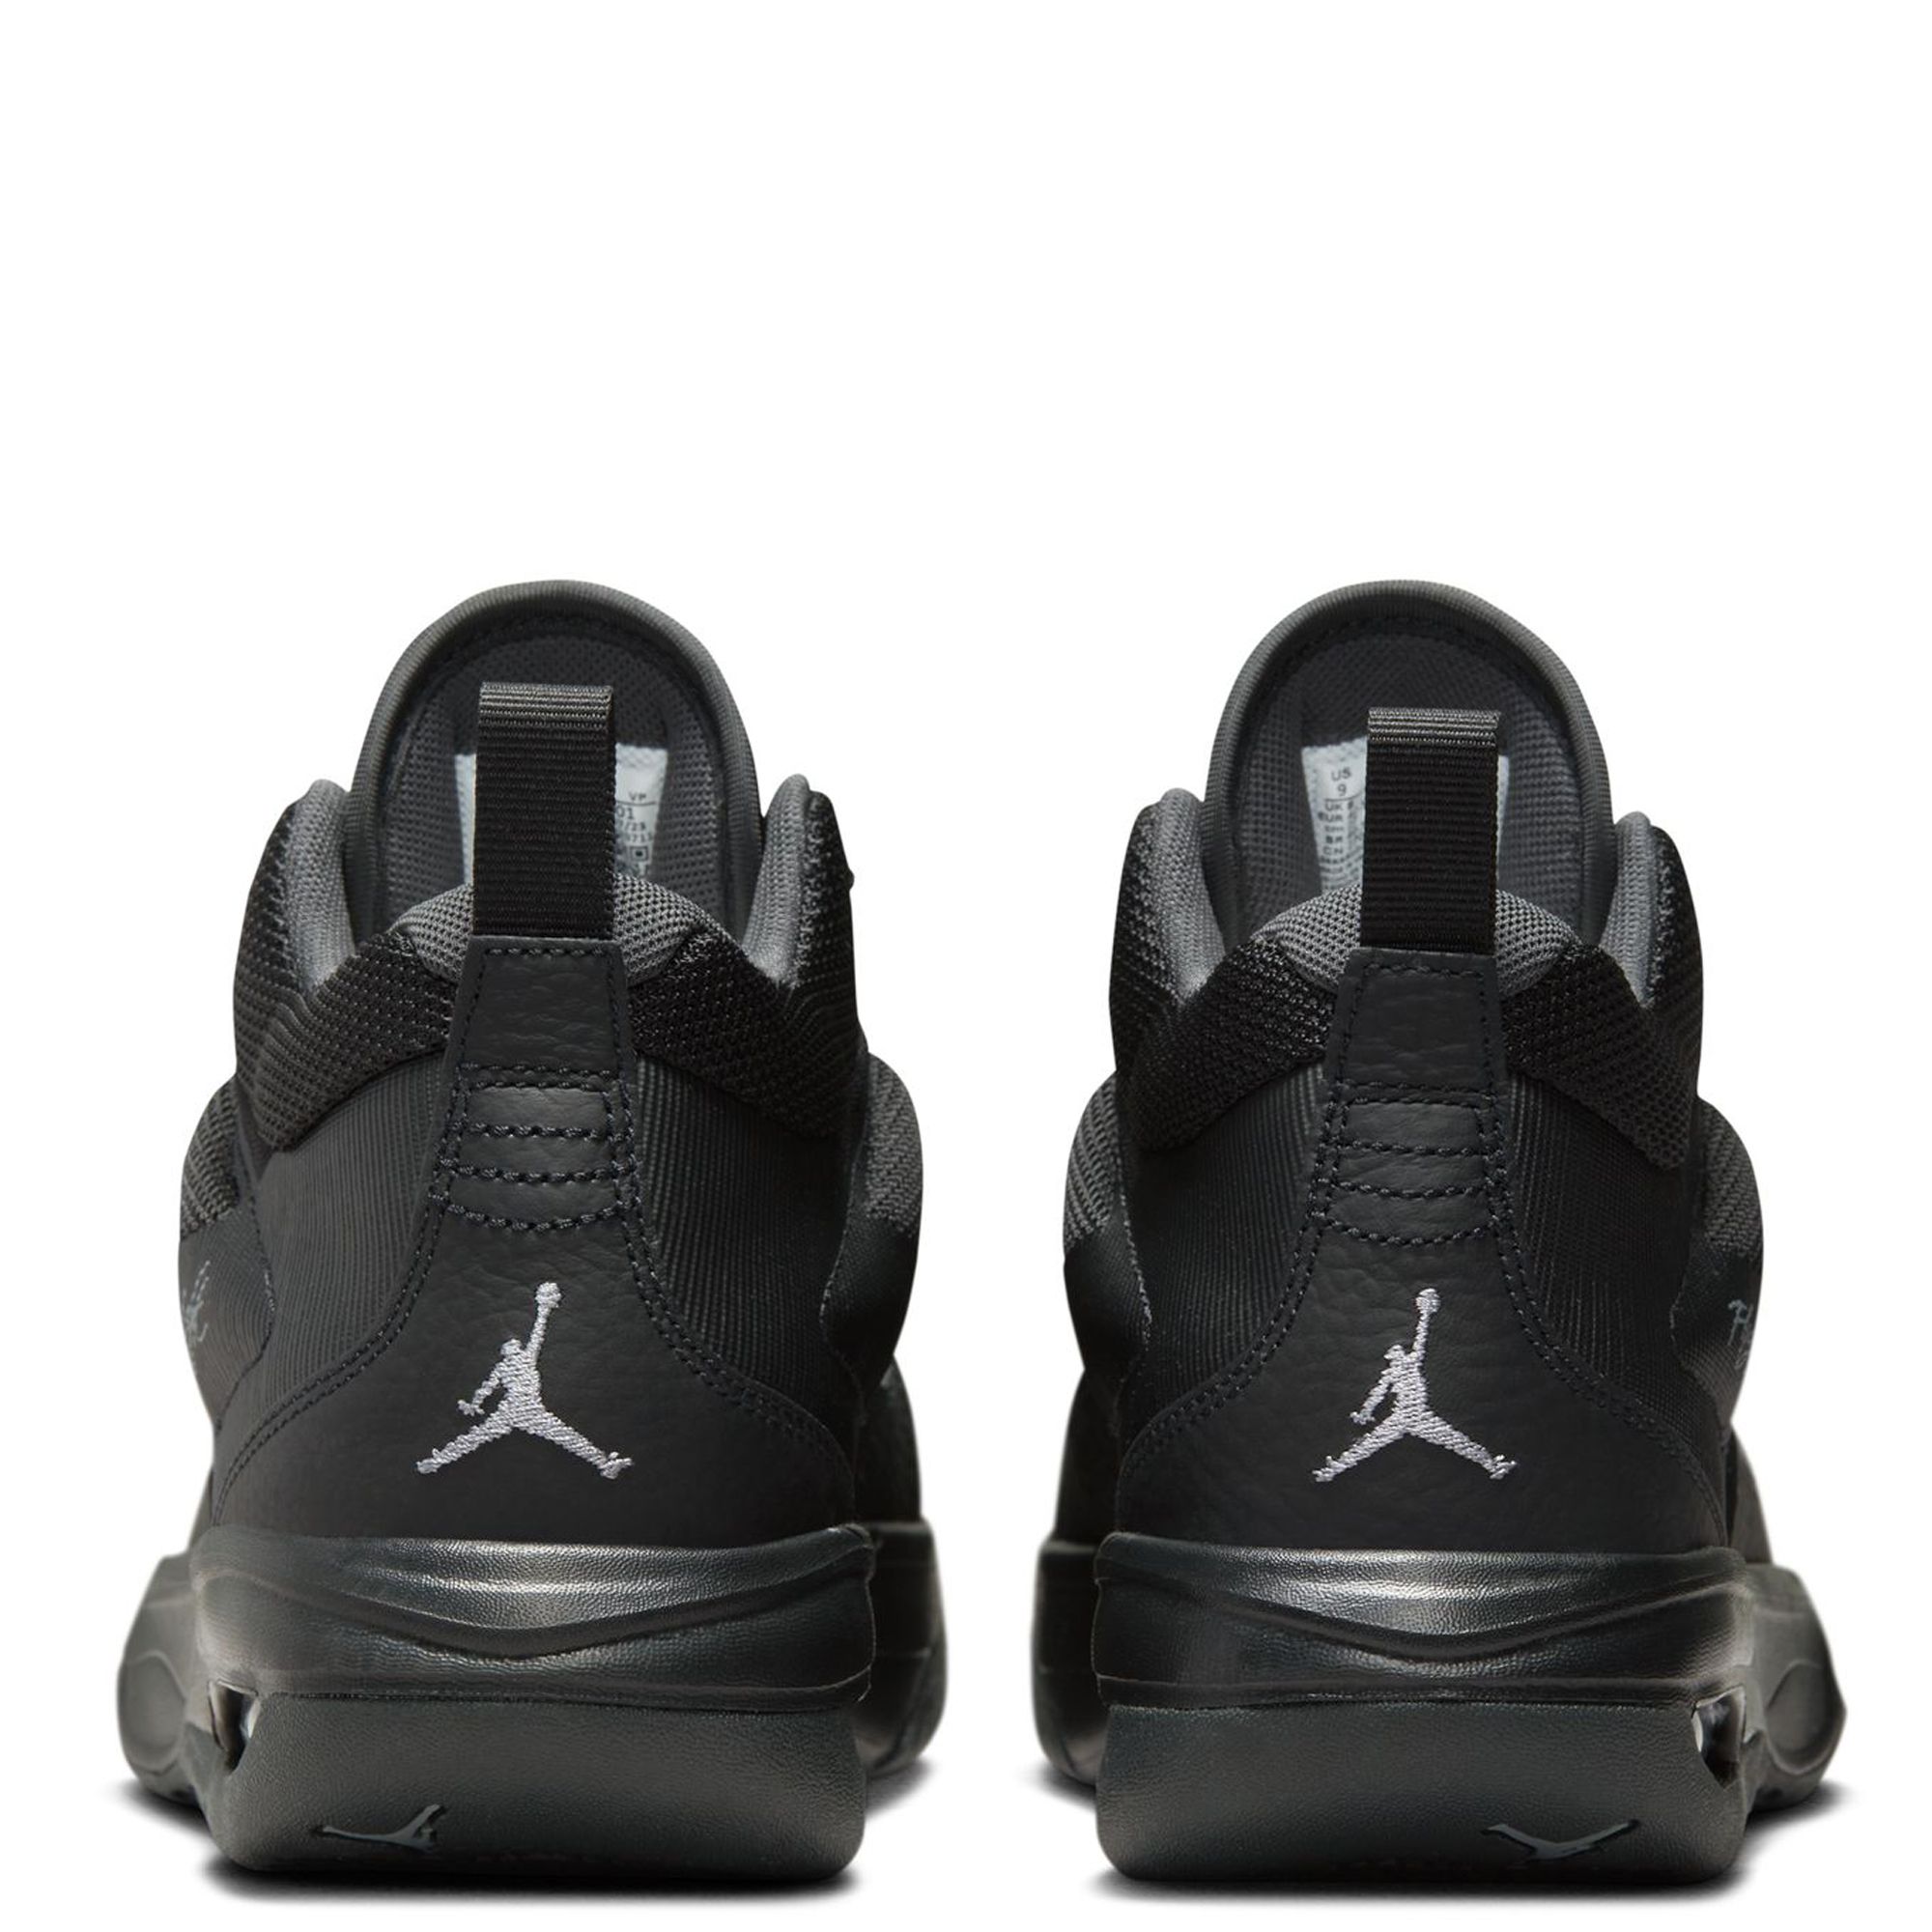 LIMITED EDITION NIKE MAX AIR JORDAN STAY LOYAL INFRARED 23 TRIPLE BLACK  LEATHER